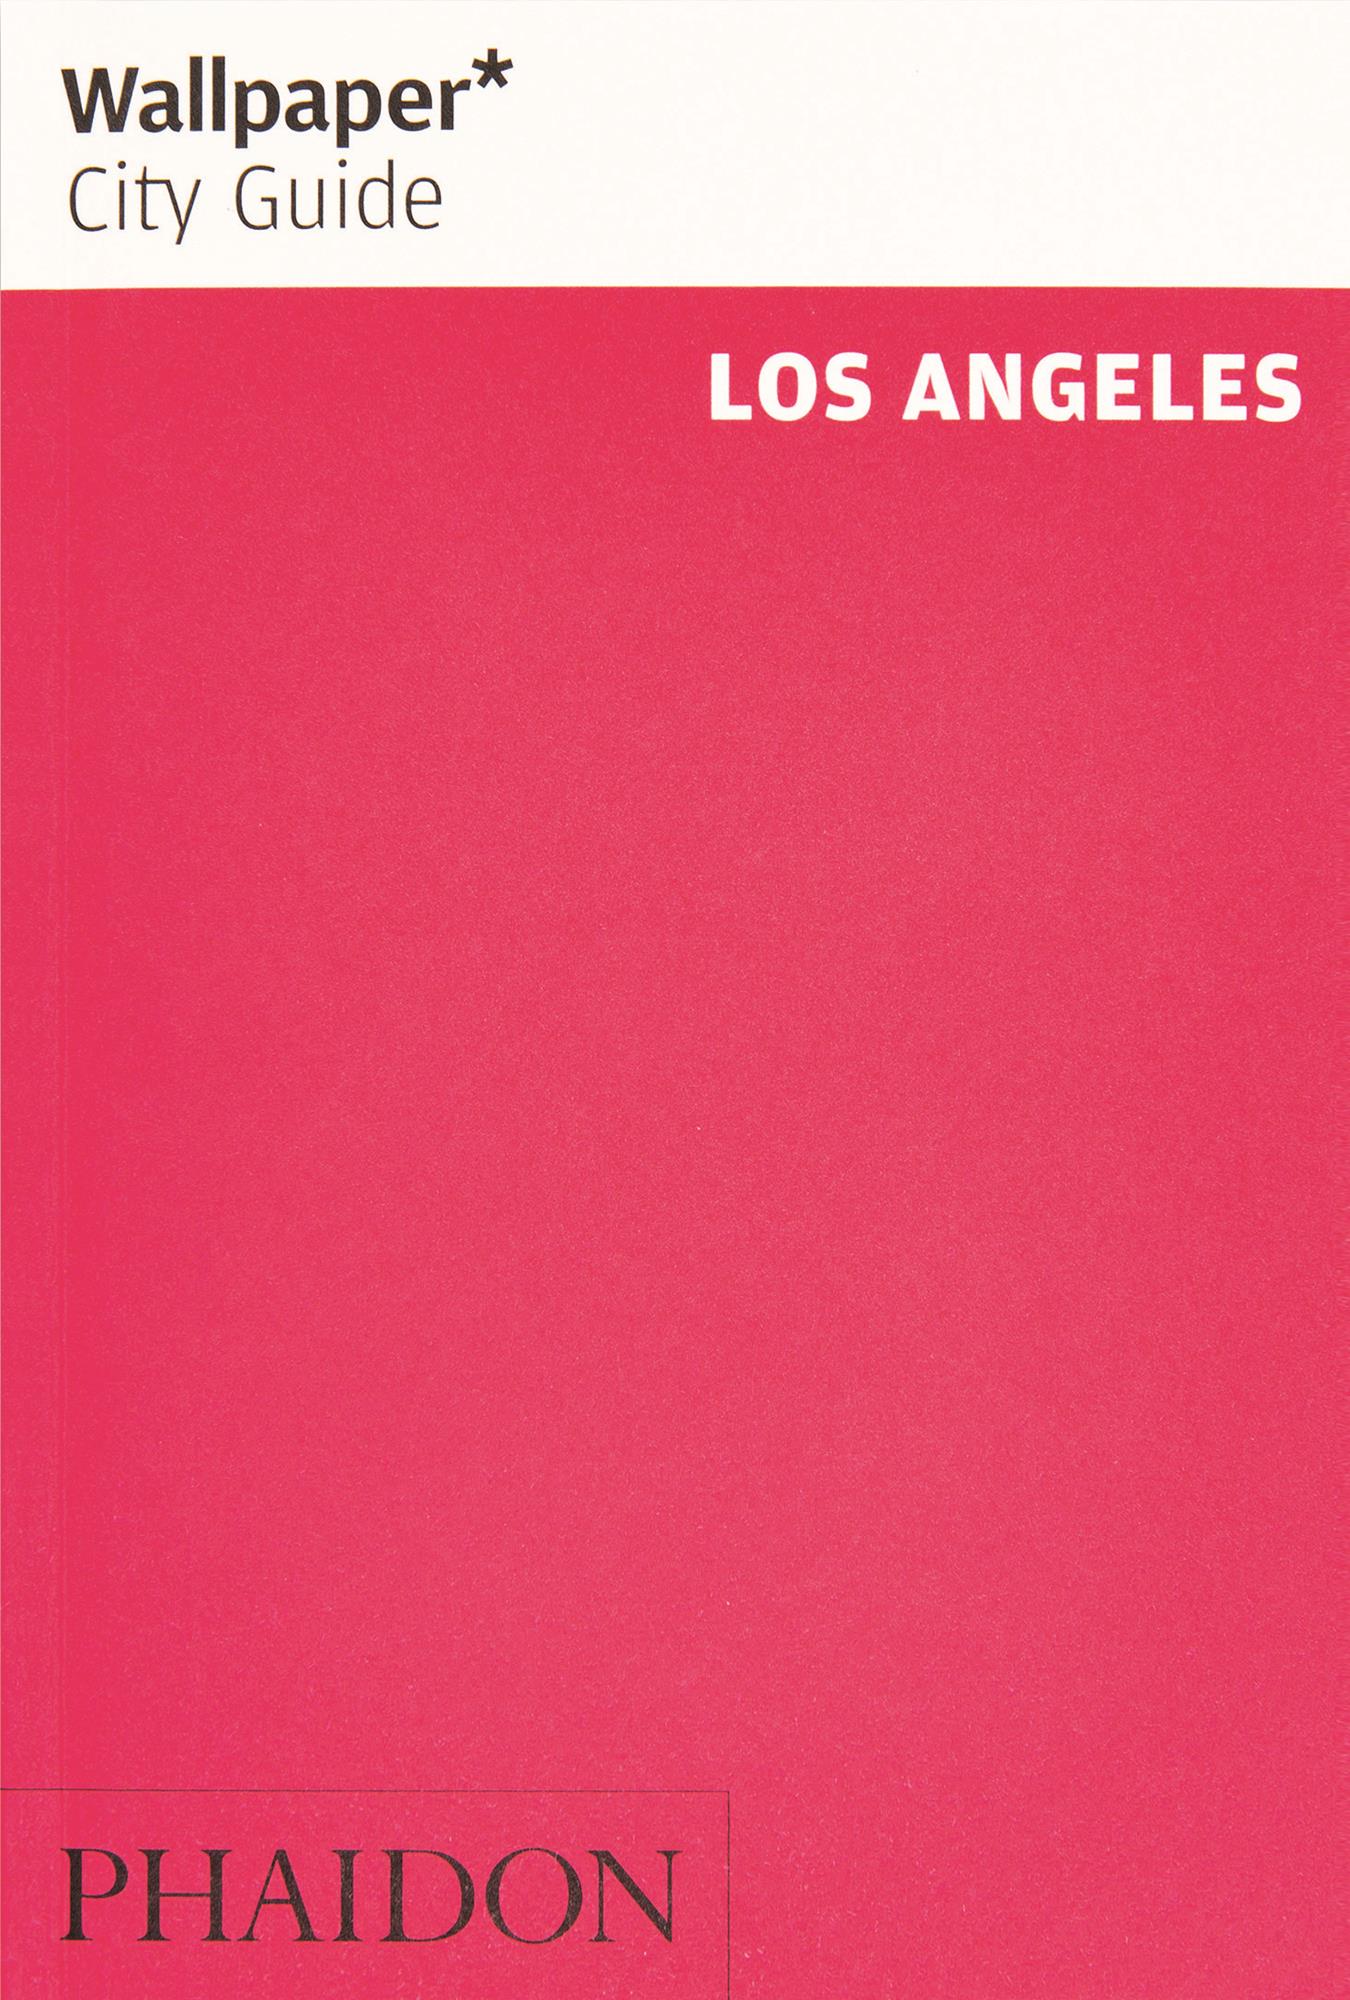 * City Guide Los Angeles